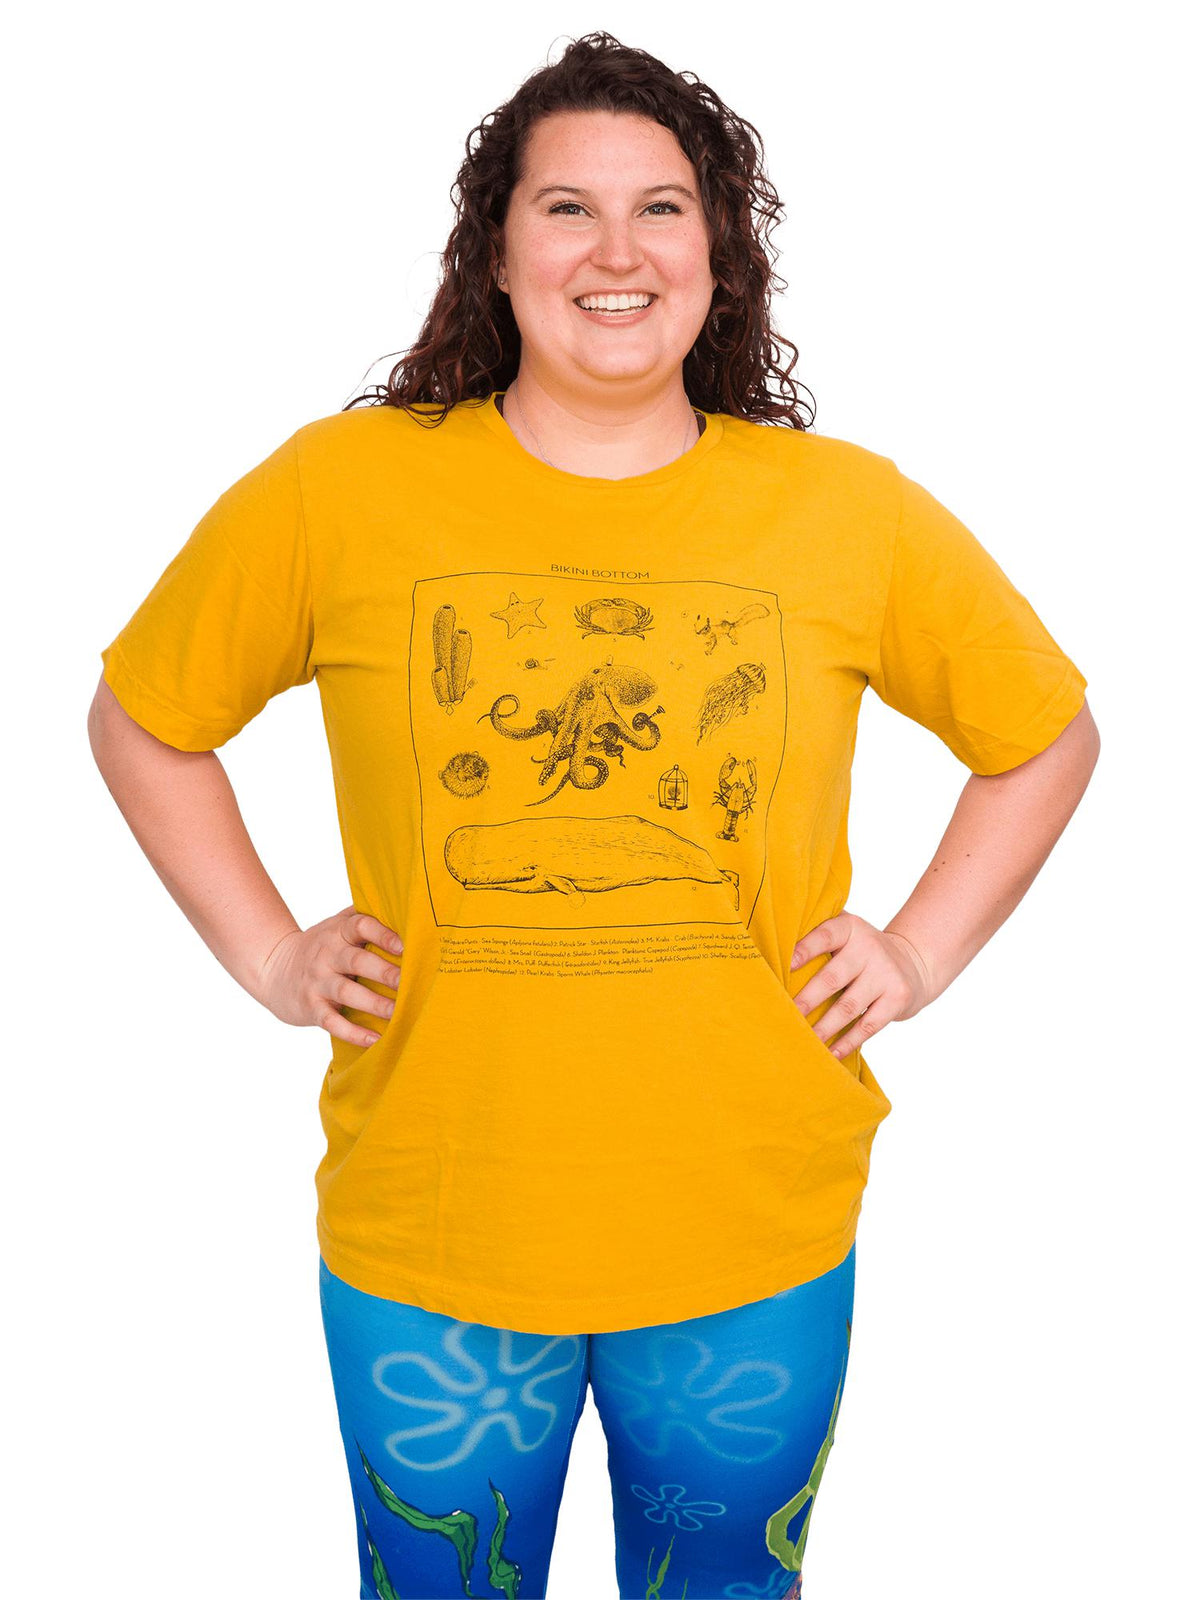 Model: Kela is a marine conservationist who strives to connect students with educational opportunities to help expand the reach of the marine science field. She is 5’5”, 185 lbs, 36F and is wearing a size L tee and XL legging.